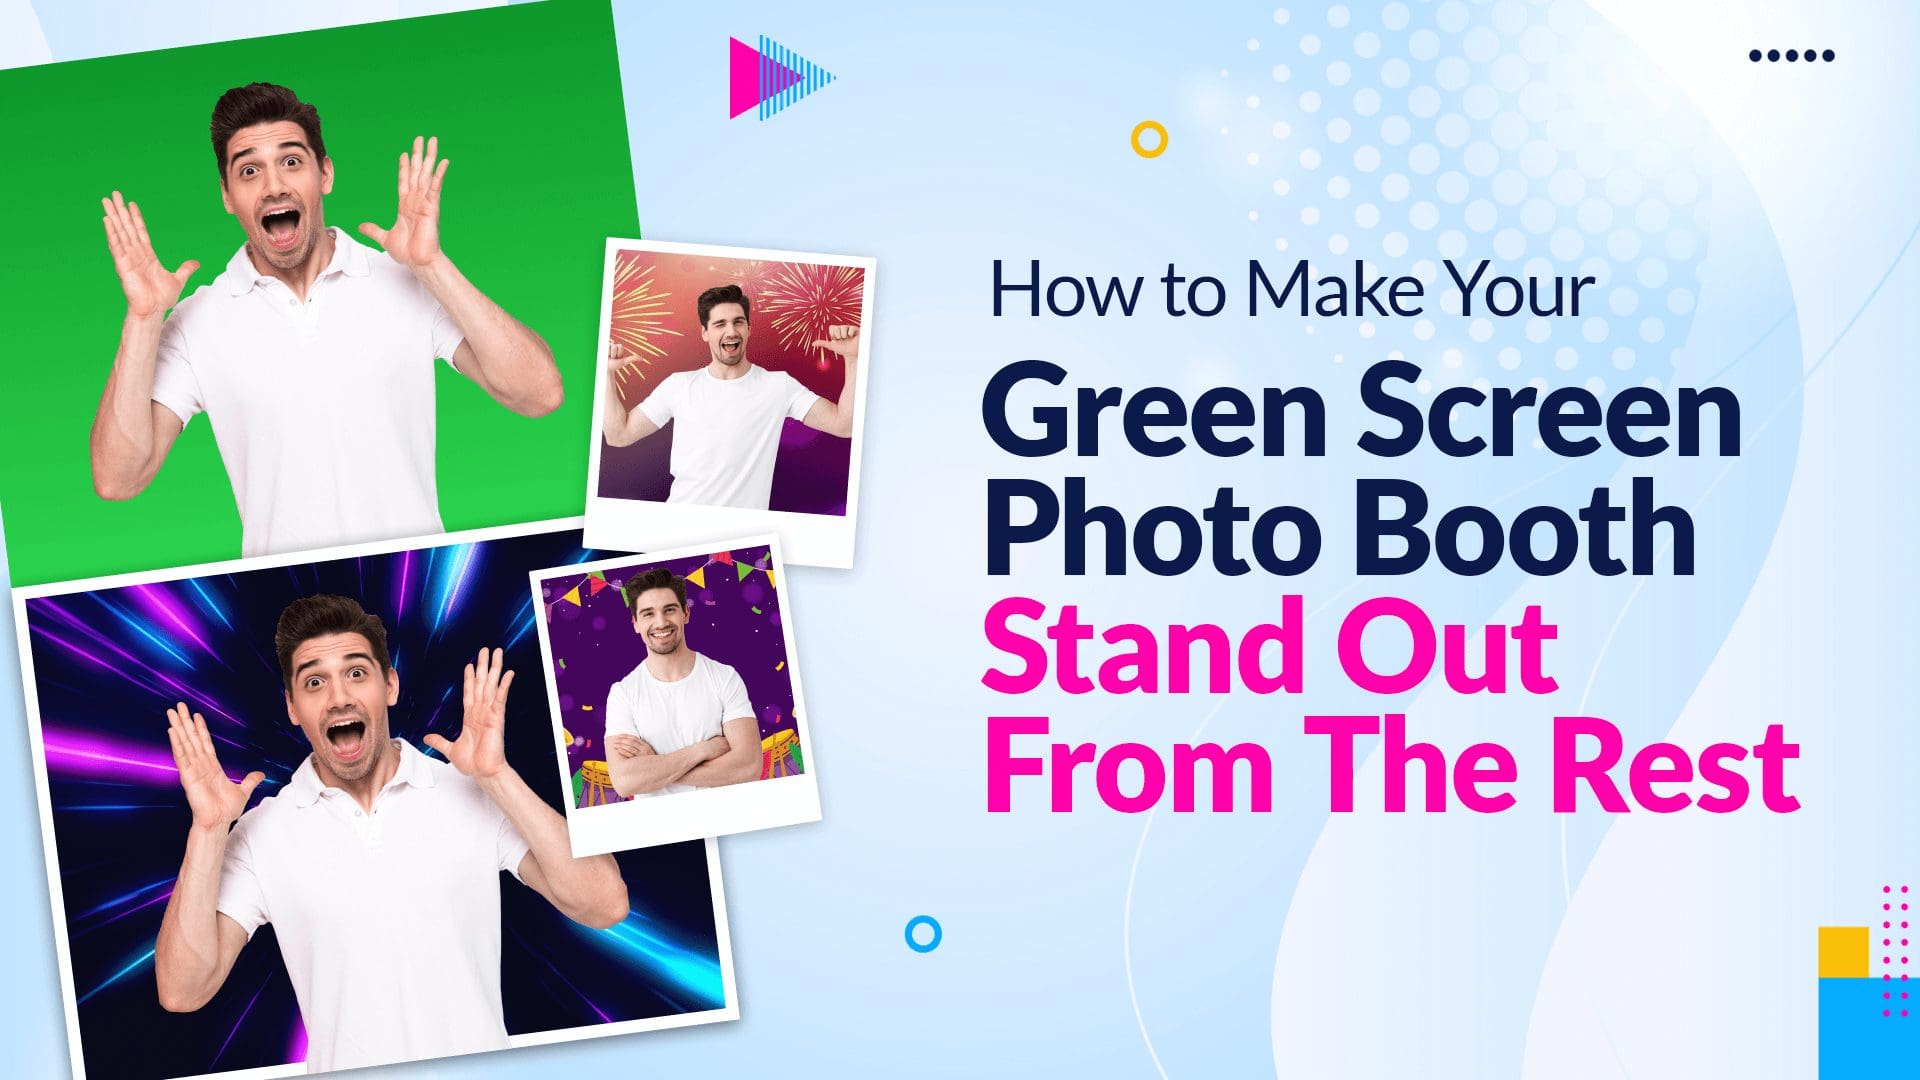 How to make your green screen photo booth stand out from the rest